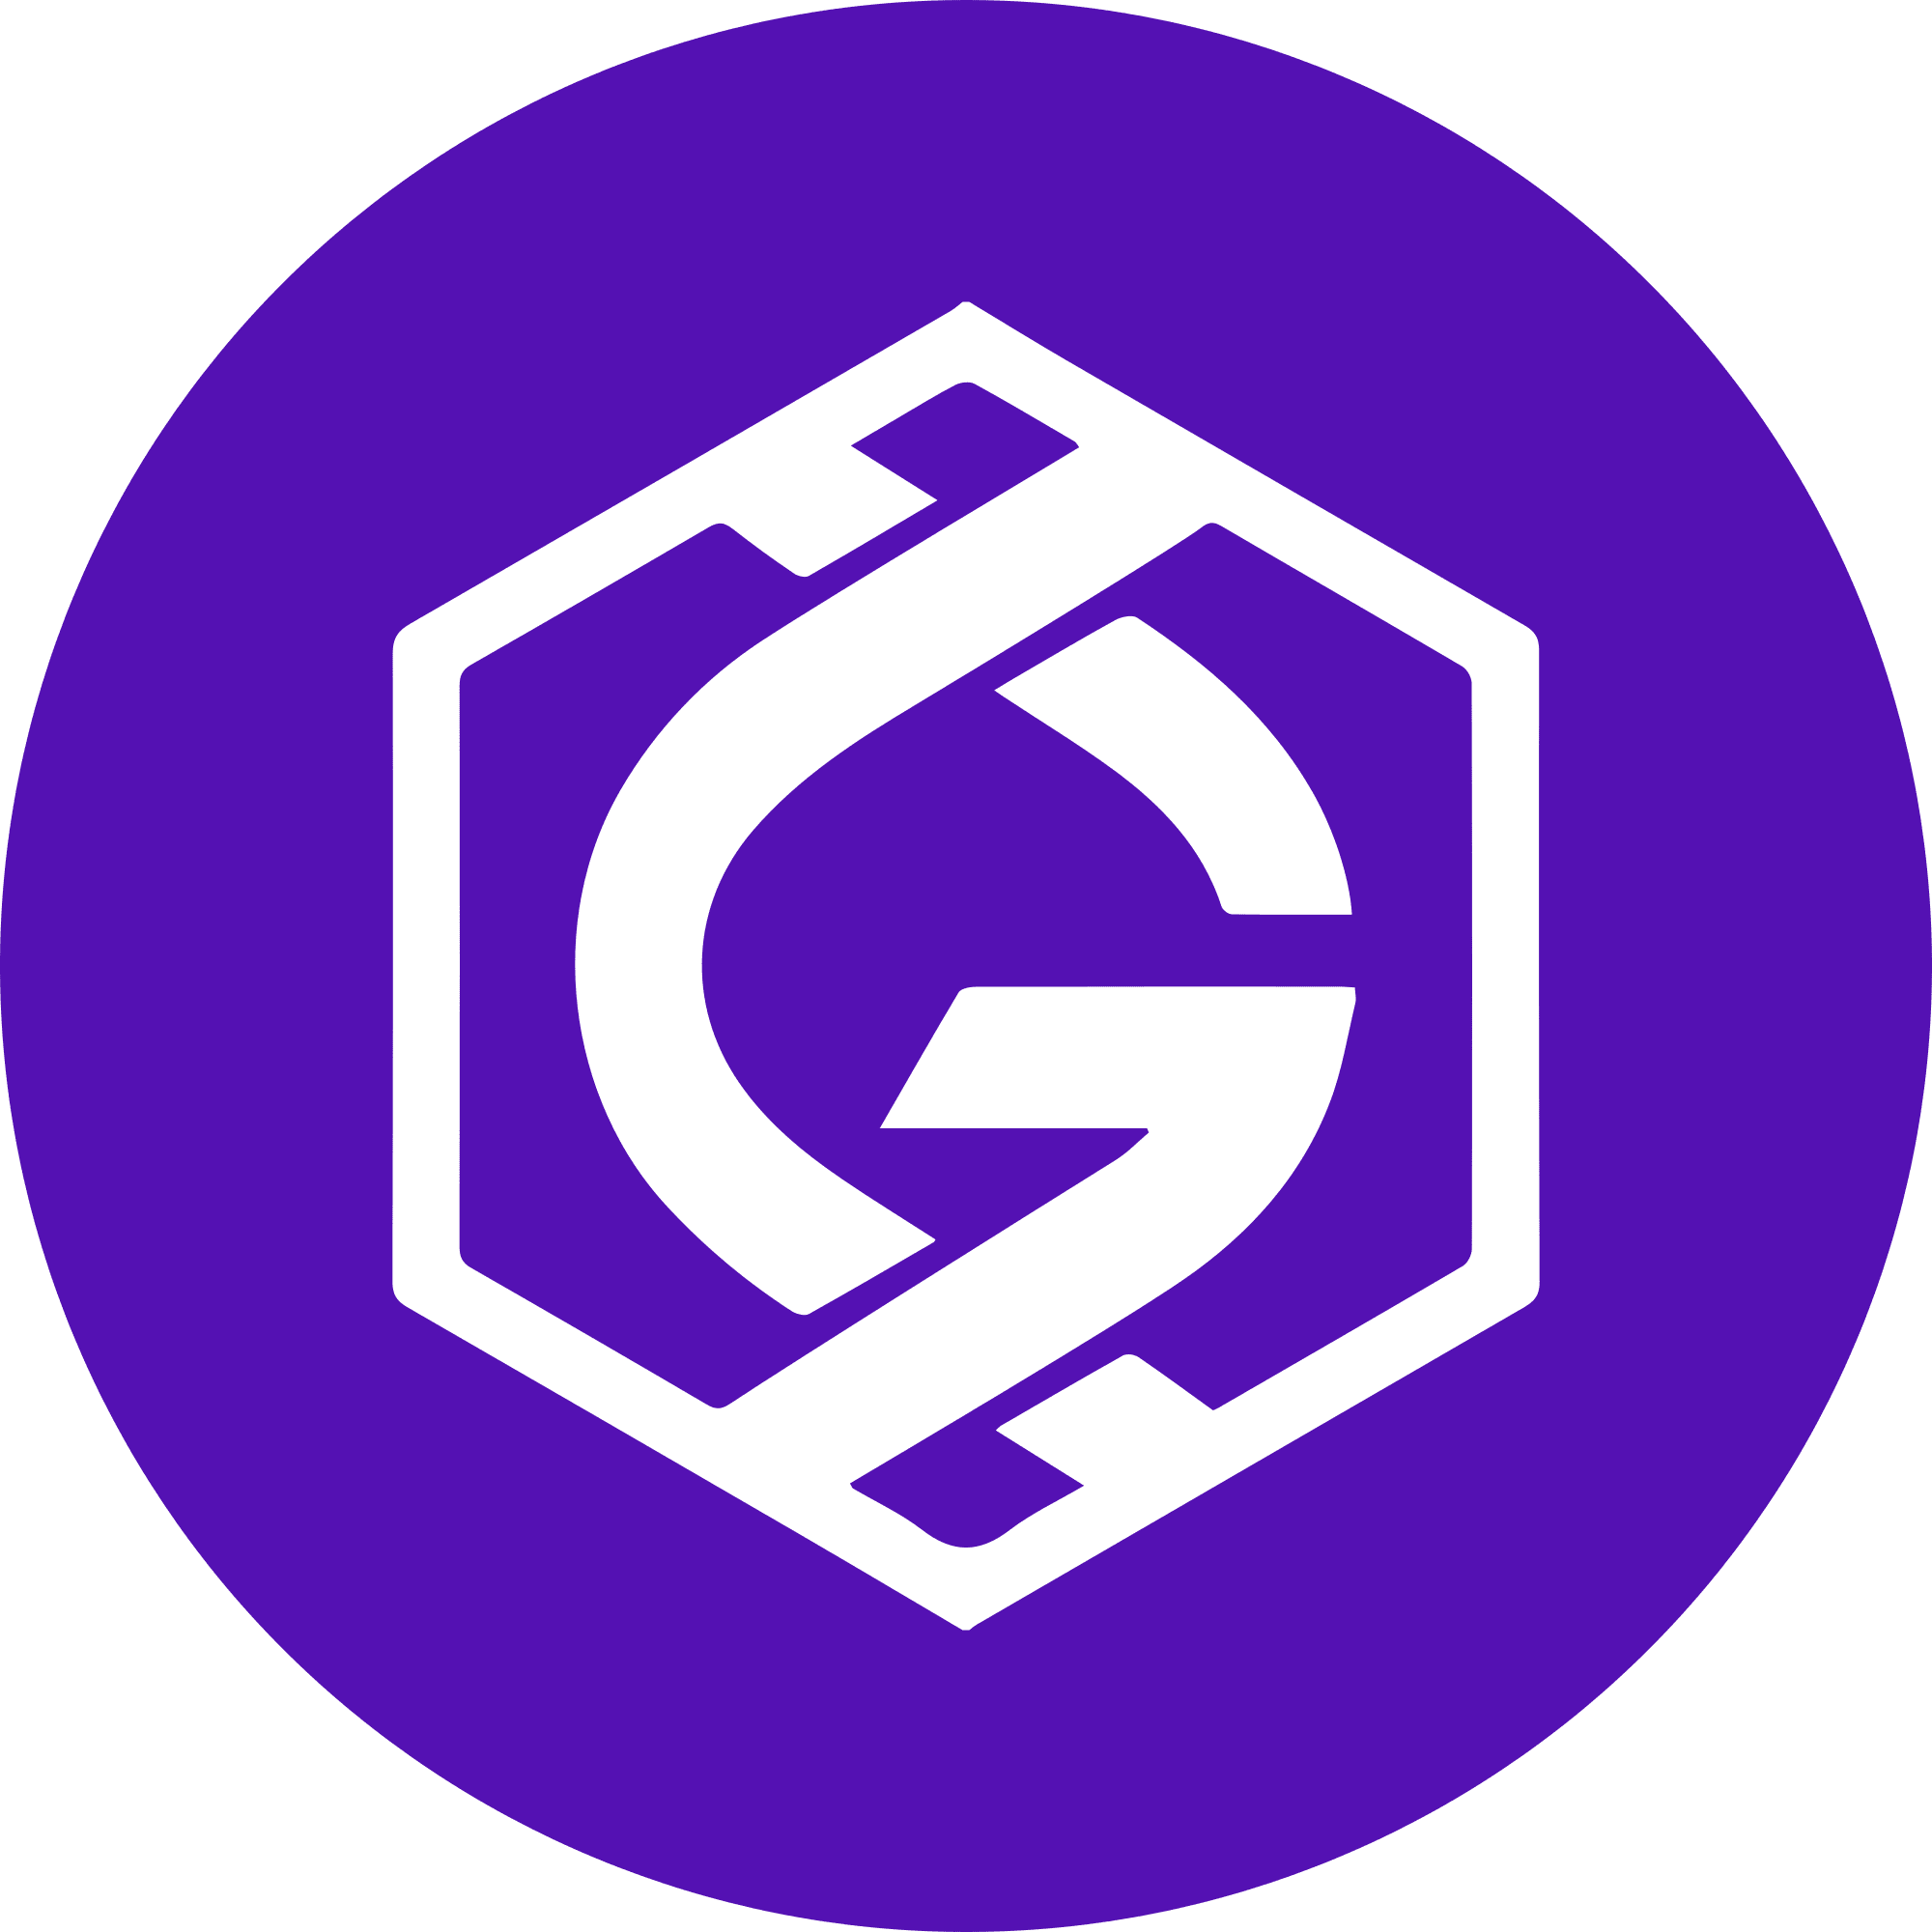 Gridcoin logo in png format